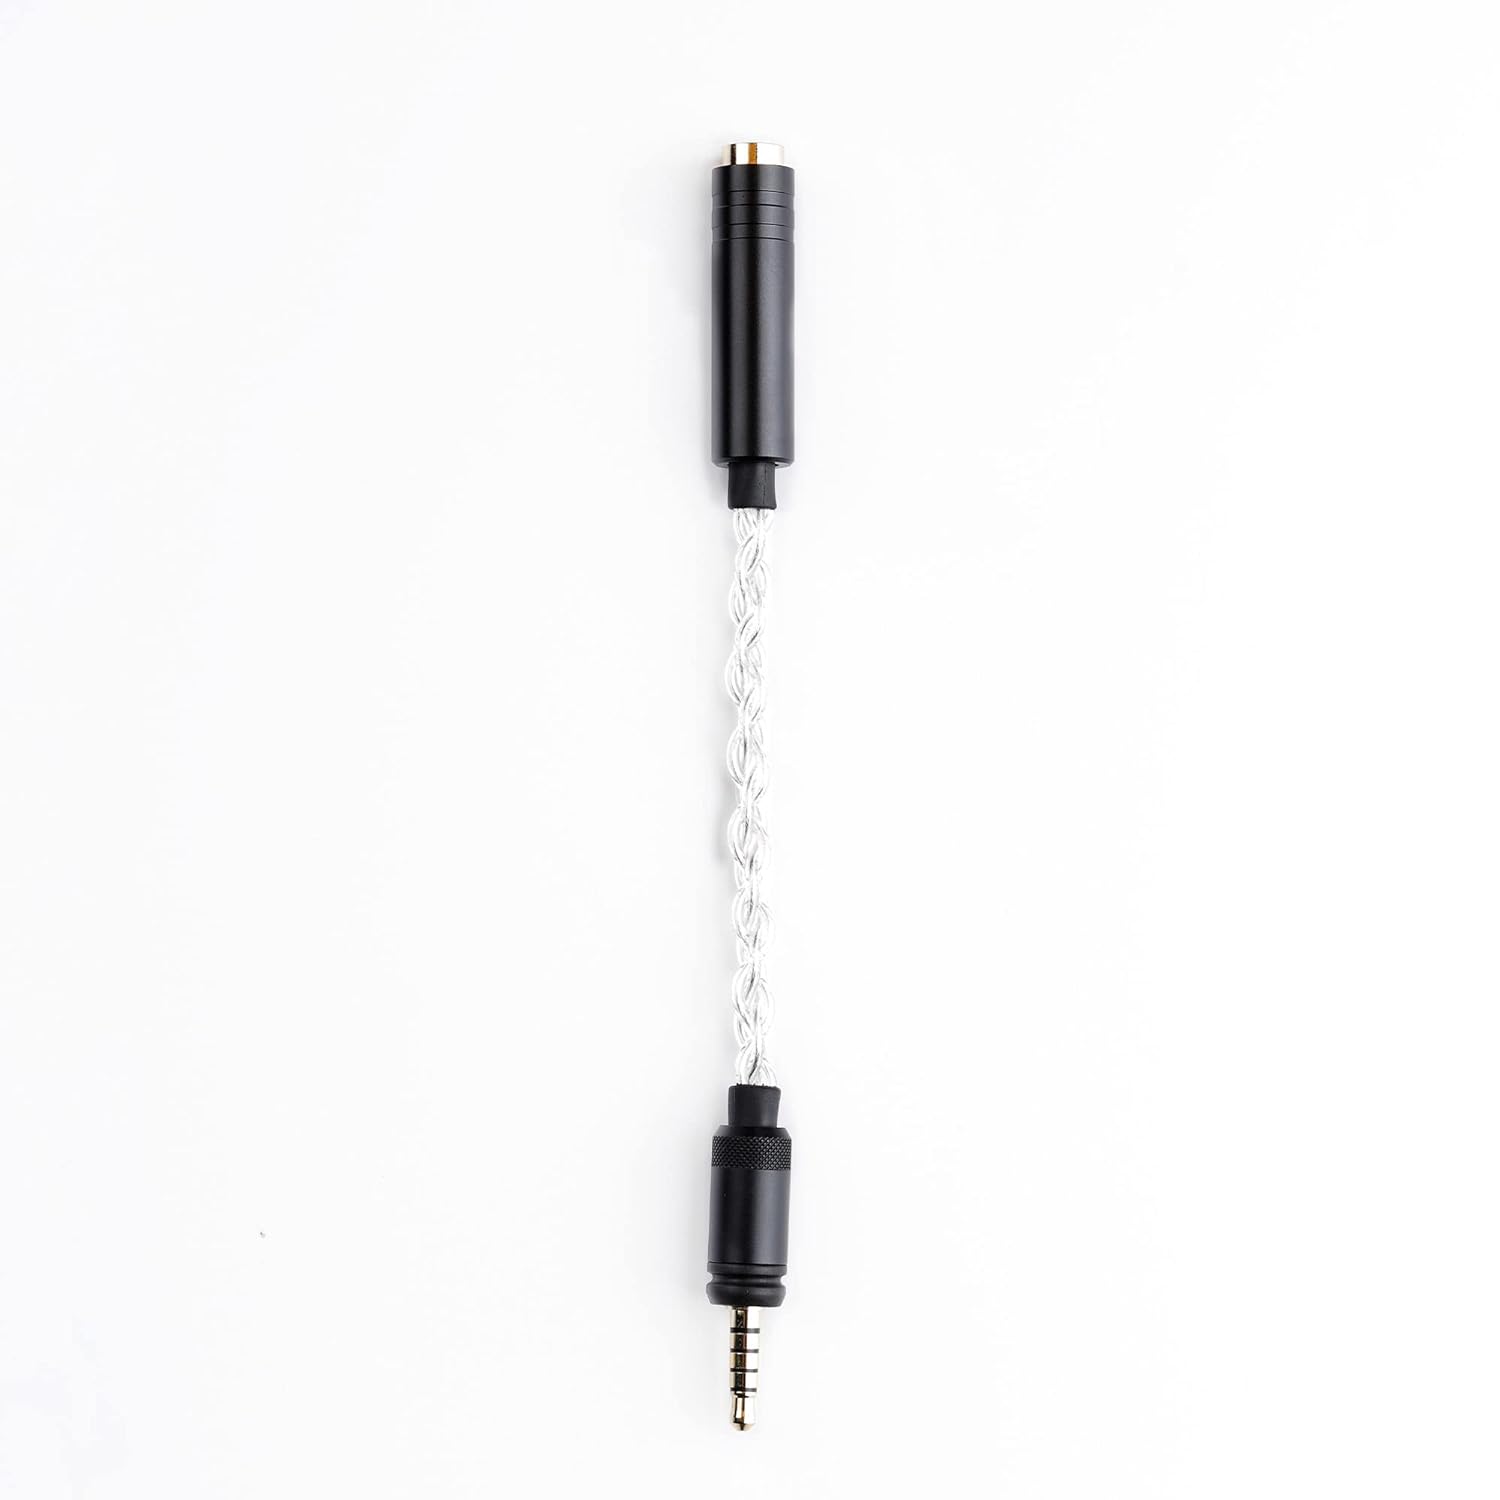 Shanling 3.5mm Male to 4.4mm female Balanced Adapter Cable For Shanling M0 Pro DAP